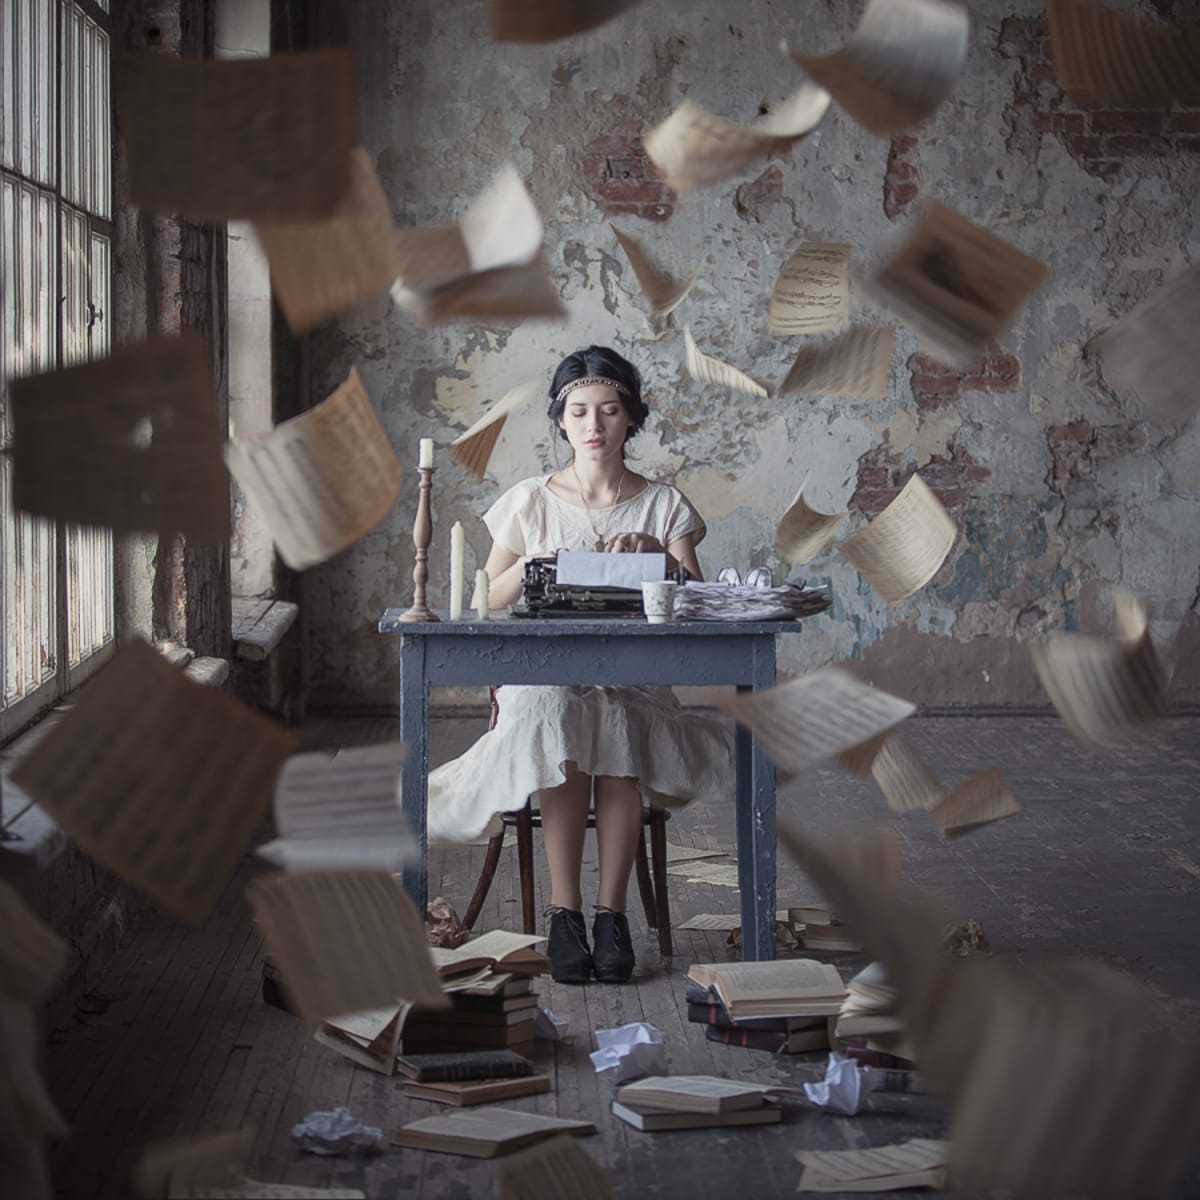 Fiction by Dasha Pears  Image:  “There is no greater agony than bearing an untold story inside you.”
― Maya Angelou, I Know Why the Caged Bird Sings